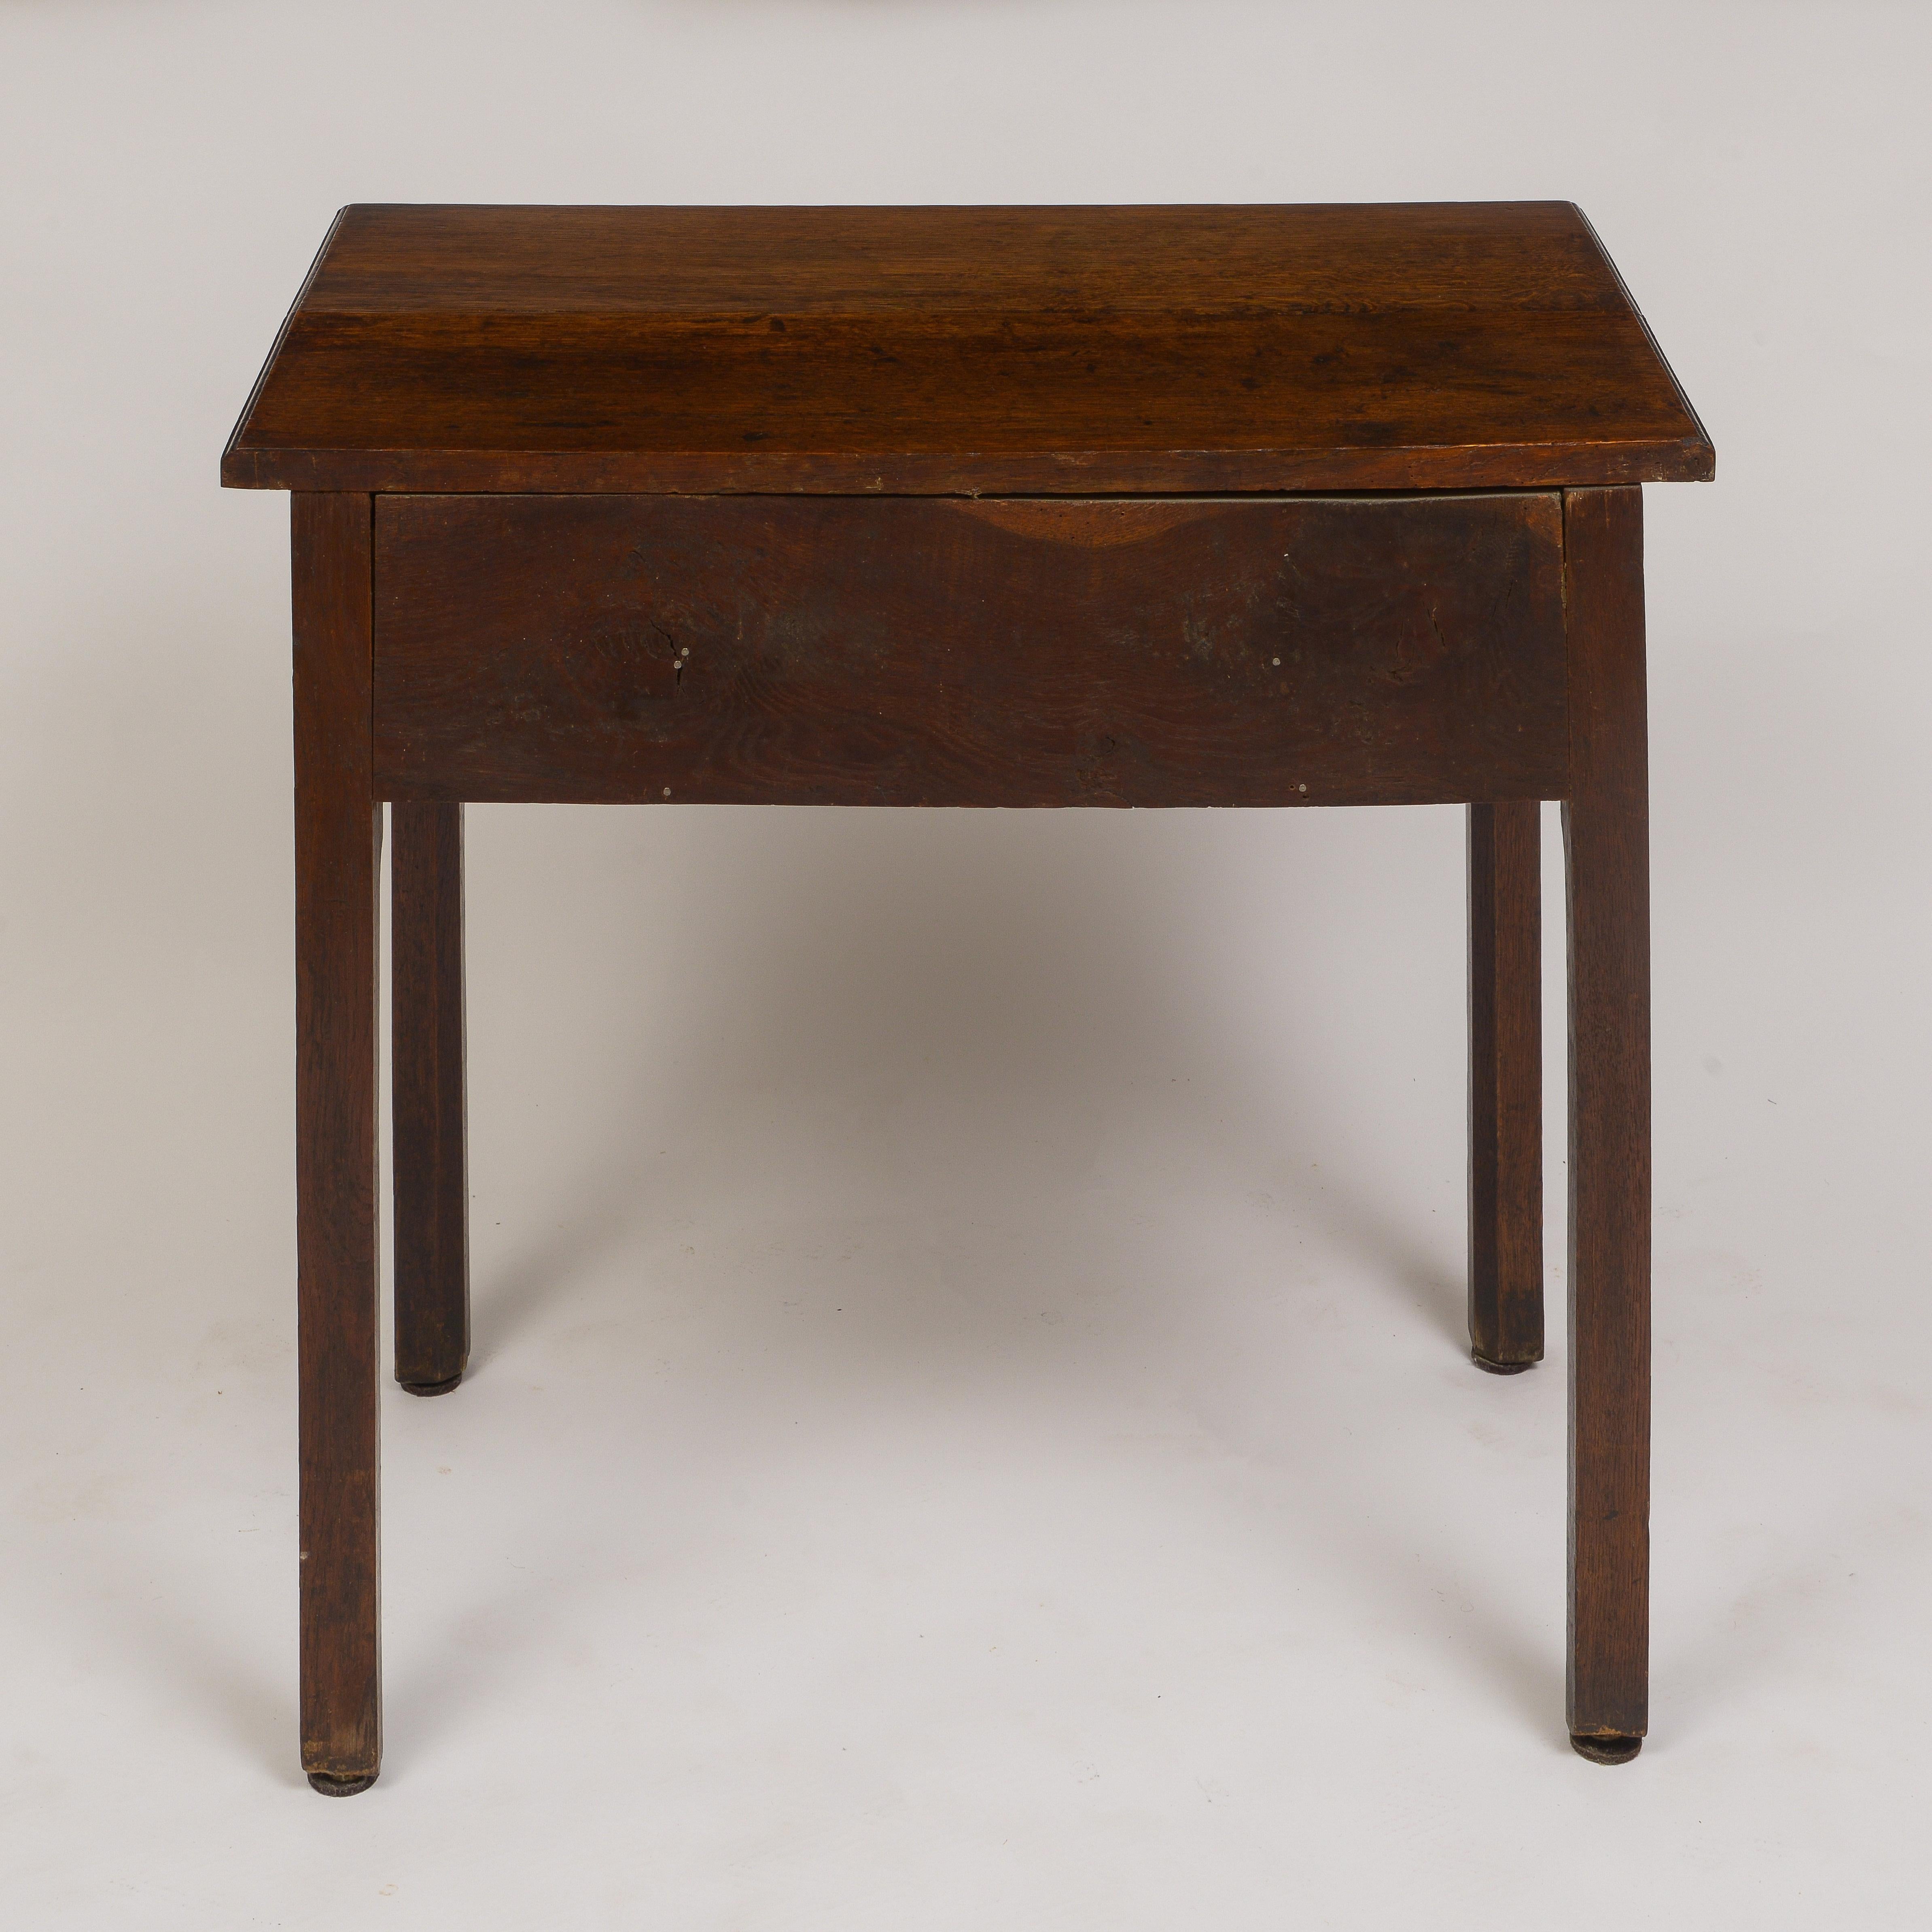 Hand-Crafted Mid 18th Century Georgian Oak Lowboy For Sale